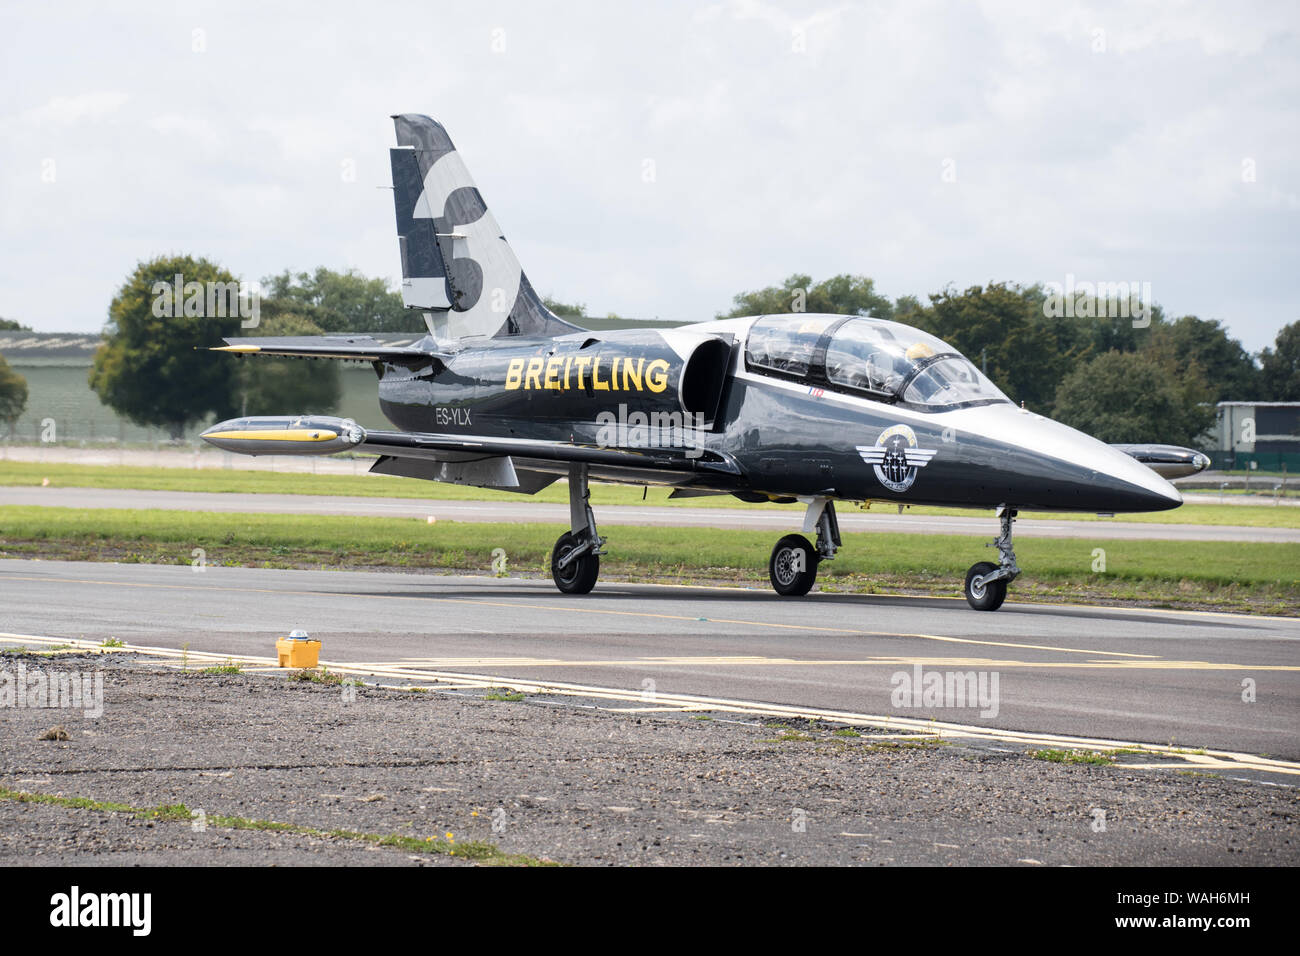 Breitling Jet Team on taxiway before performance at an airshow Stock Photo